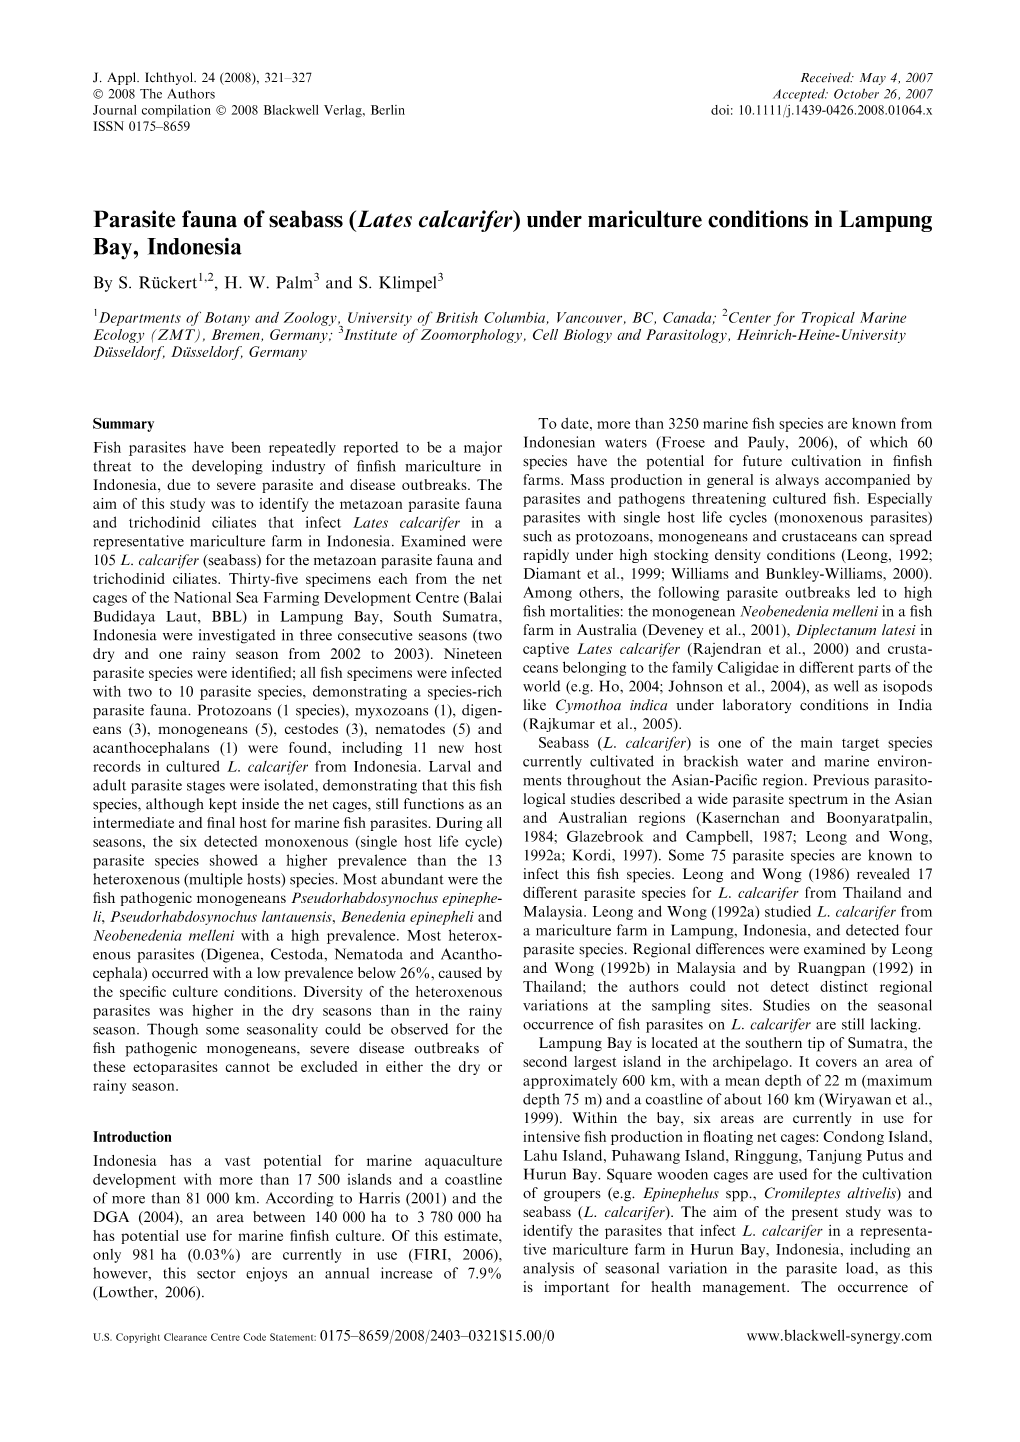 Parasite Fauna of Seabass (Lates Calcarifer) Under Mariculture Conditions in Lampung Bay, Indonesia by S